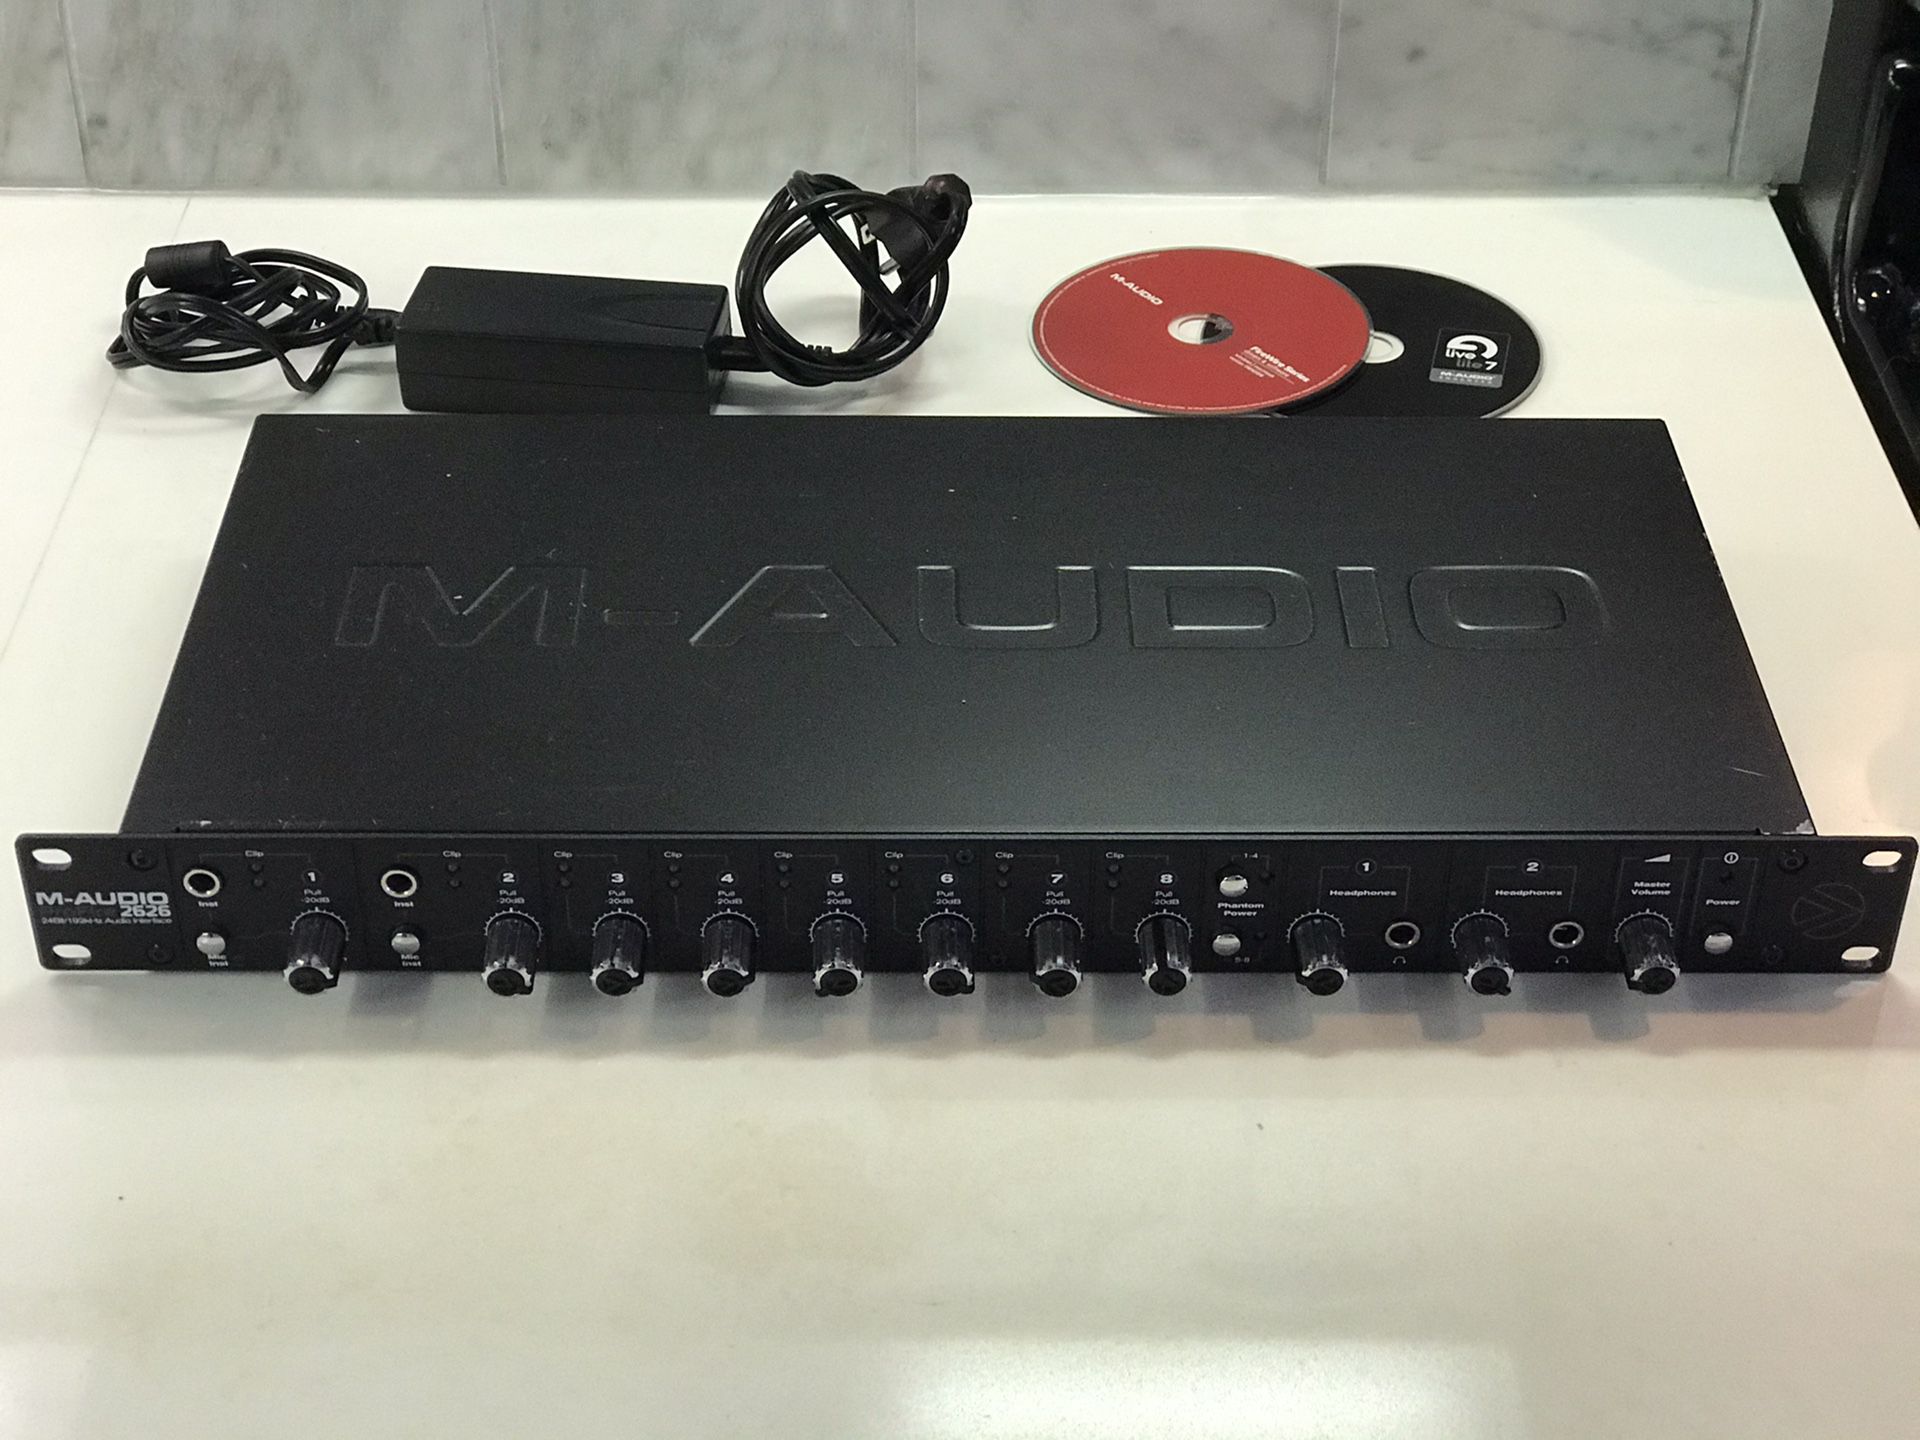 M-Audio Pro Fire 2626 , Audio interface with software and all accessories